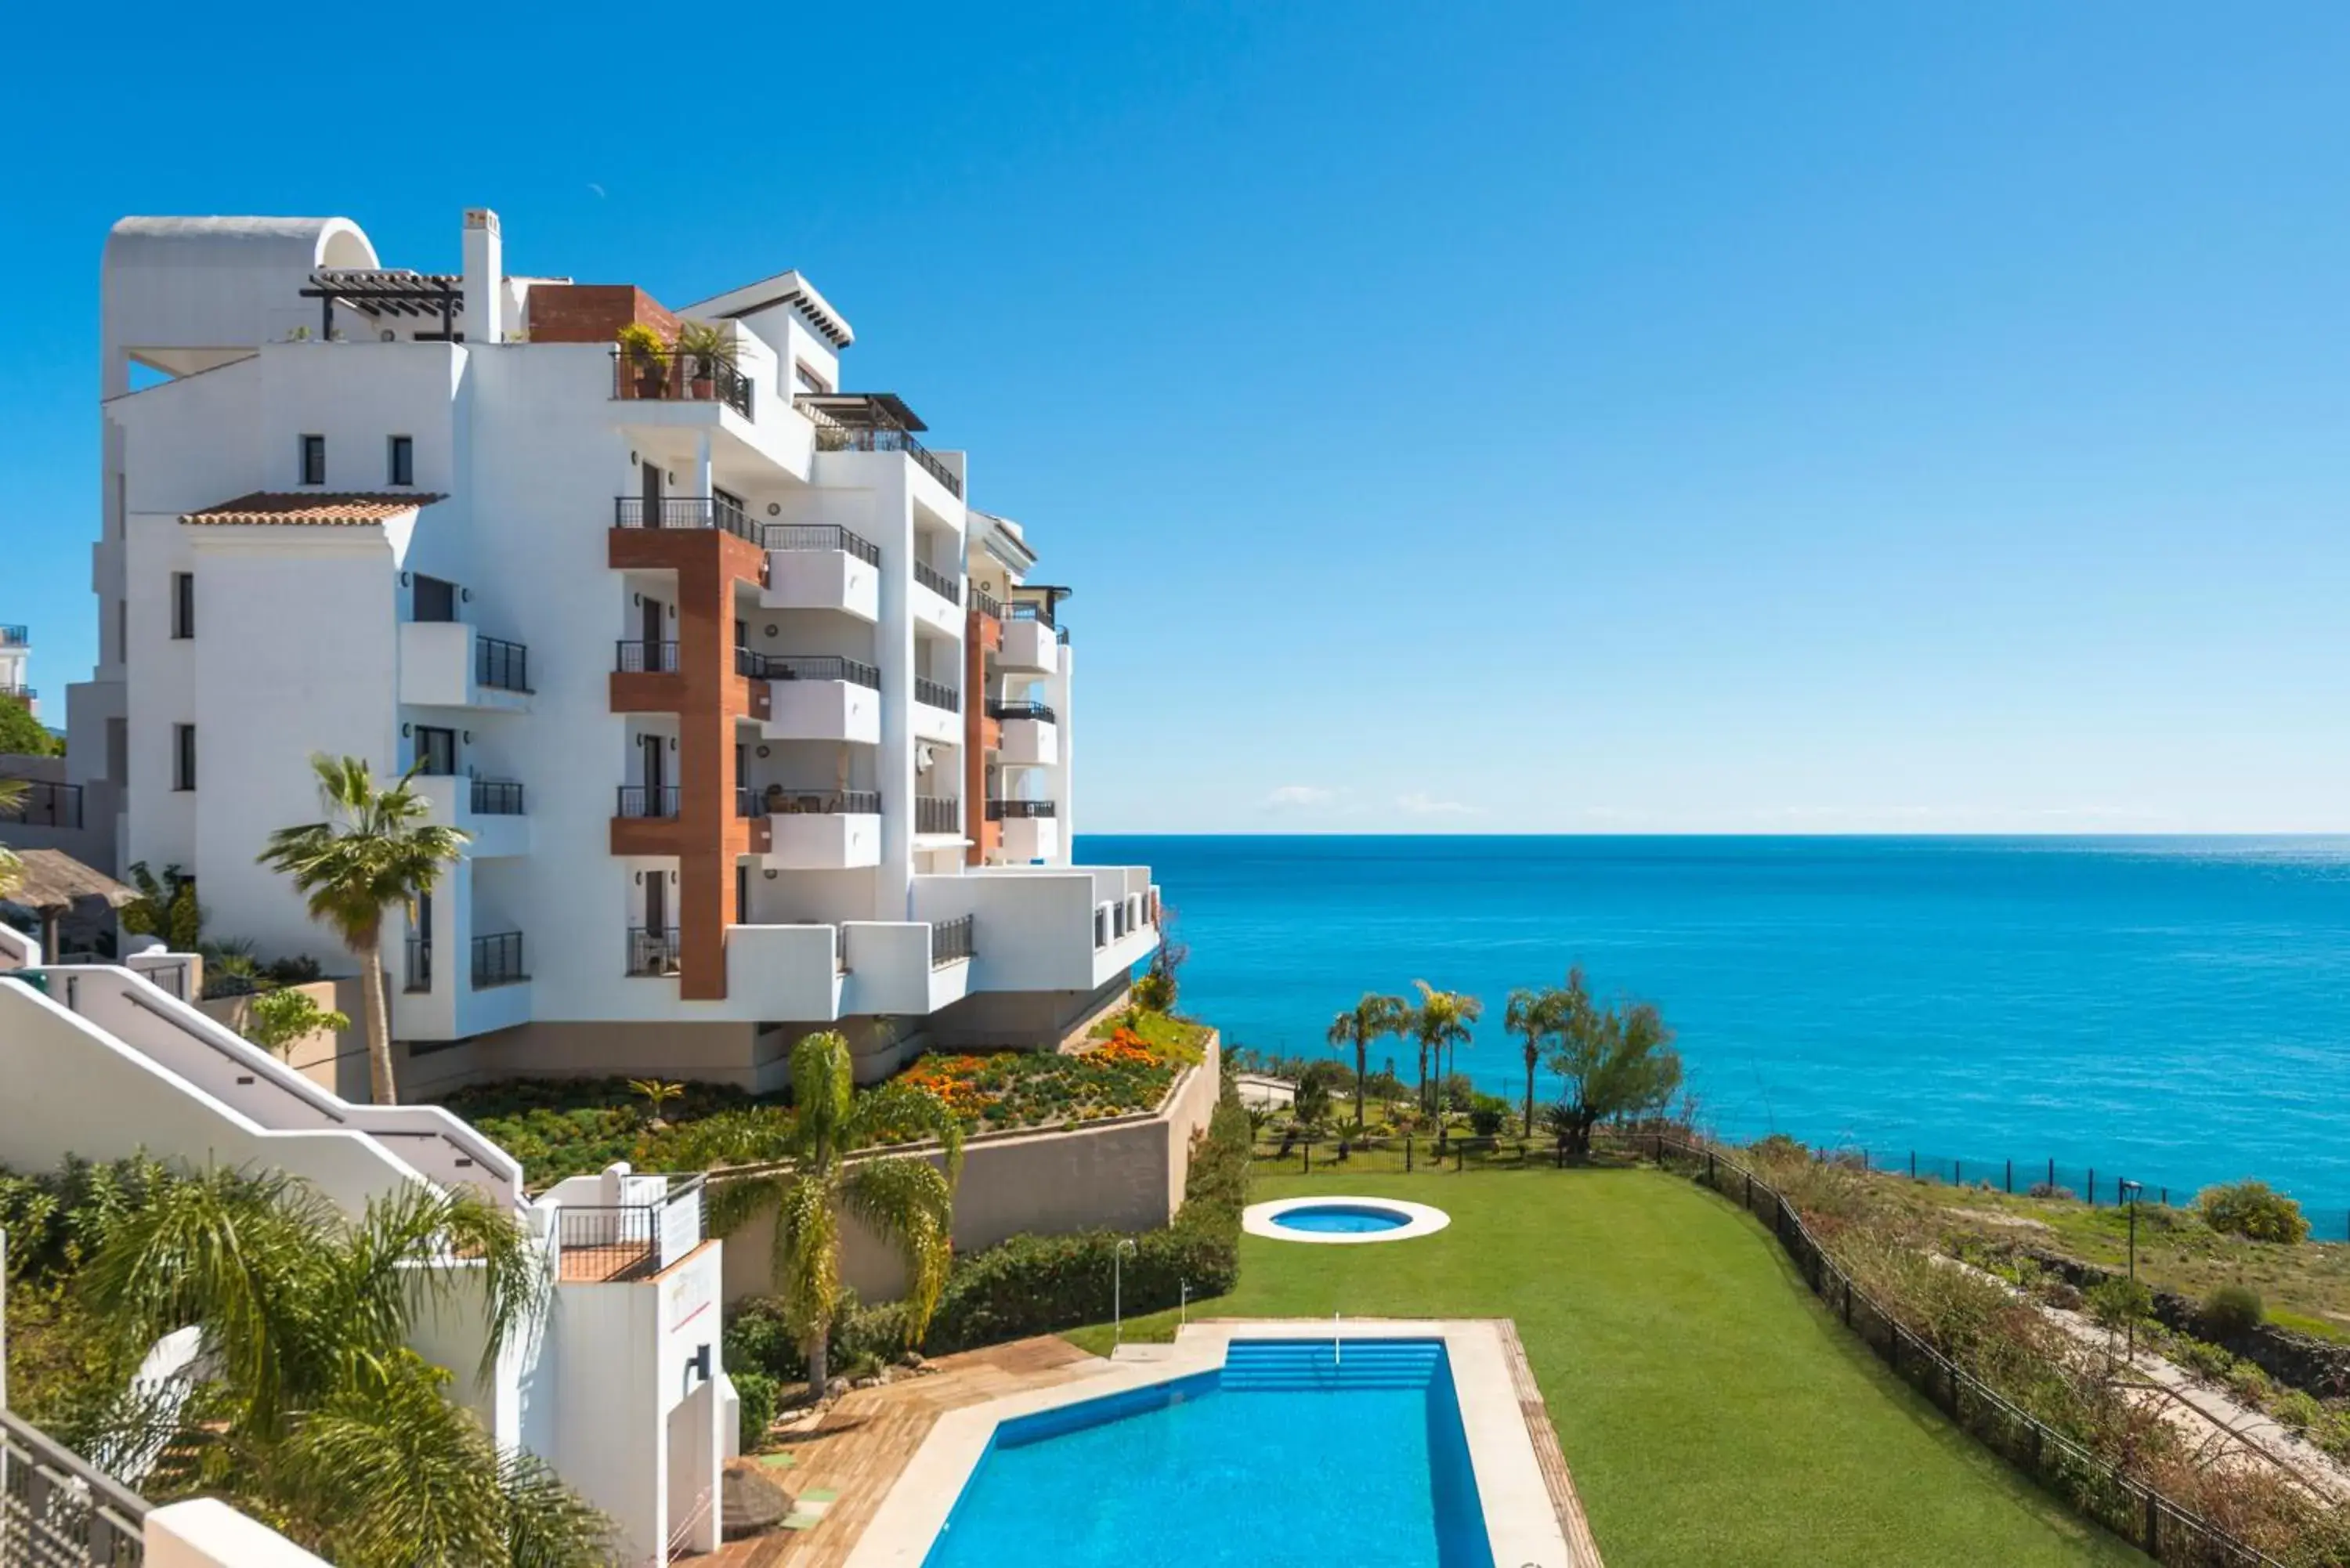 Property building, Pool View in Olée Nerja Holiday Rentals by Fuerte Group